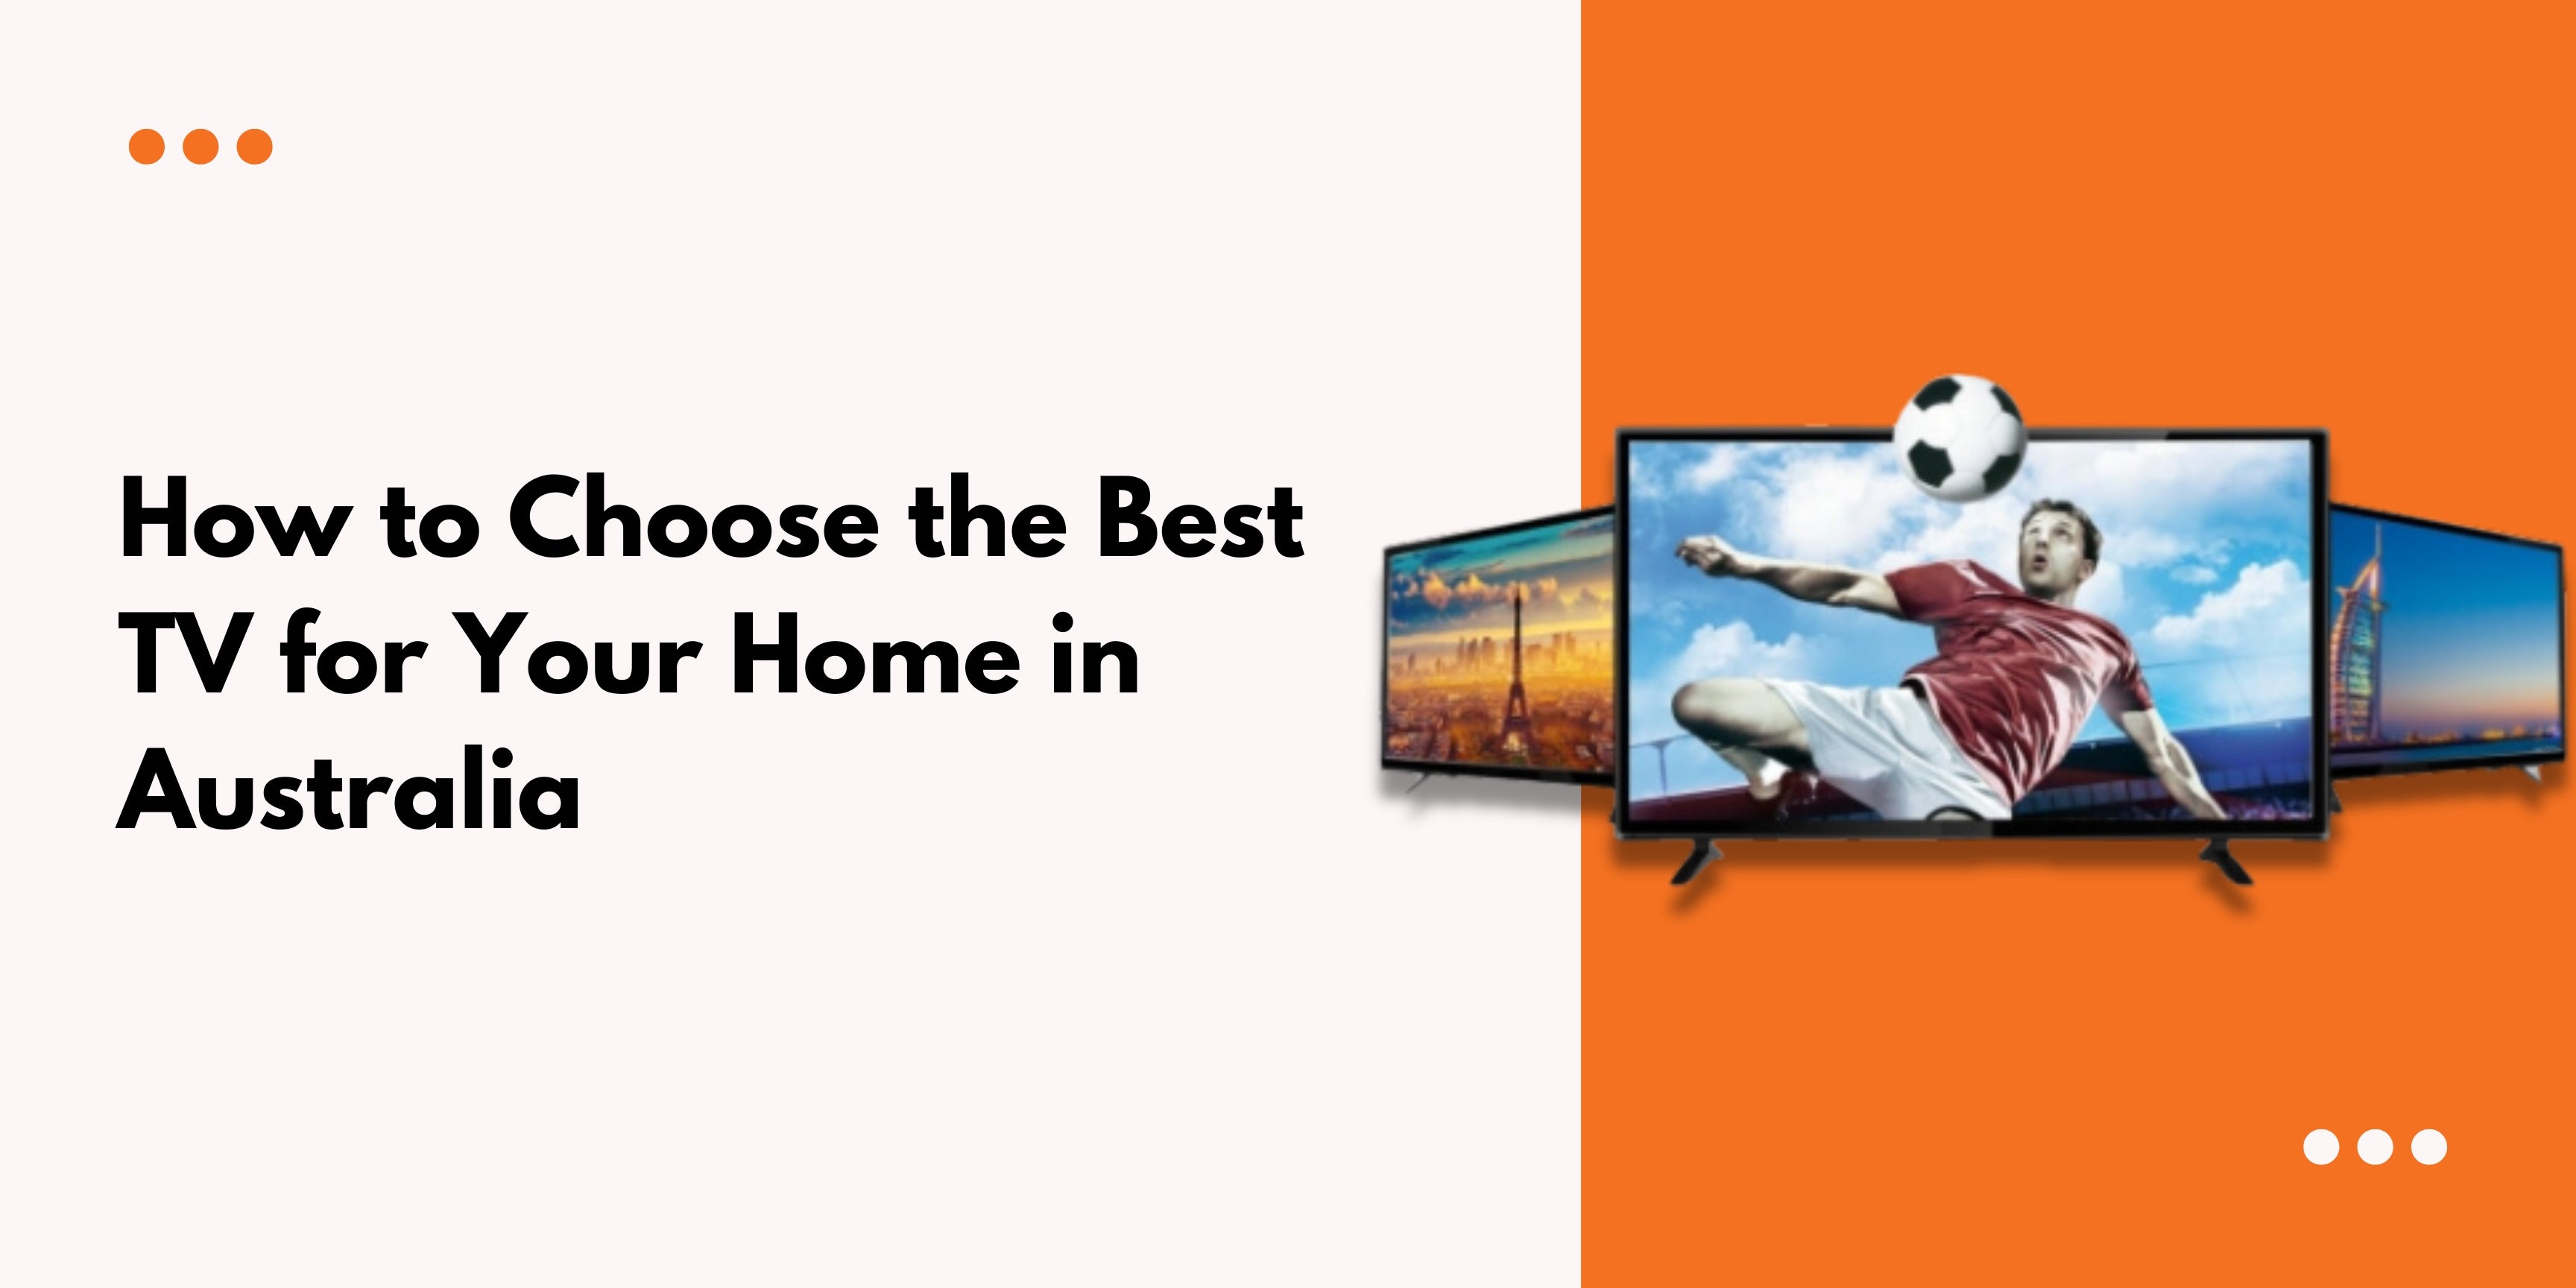 How to Choose the Best TV for Your Home in Australia